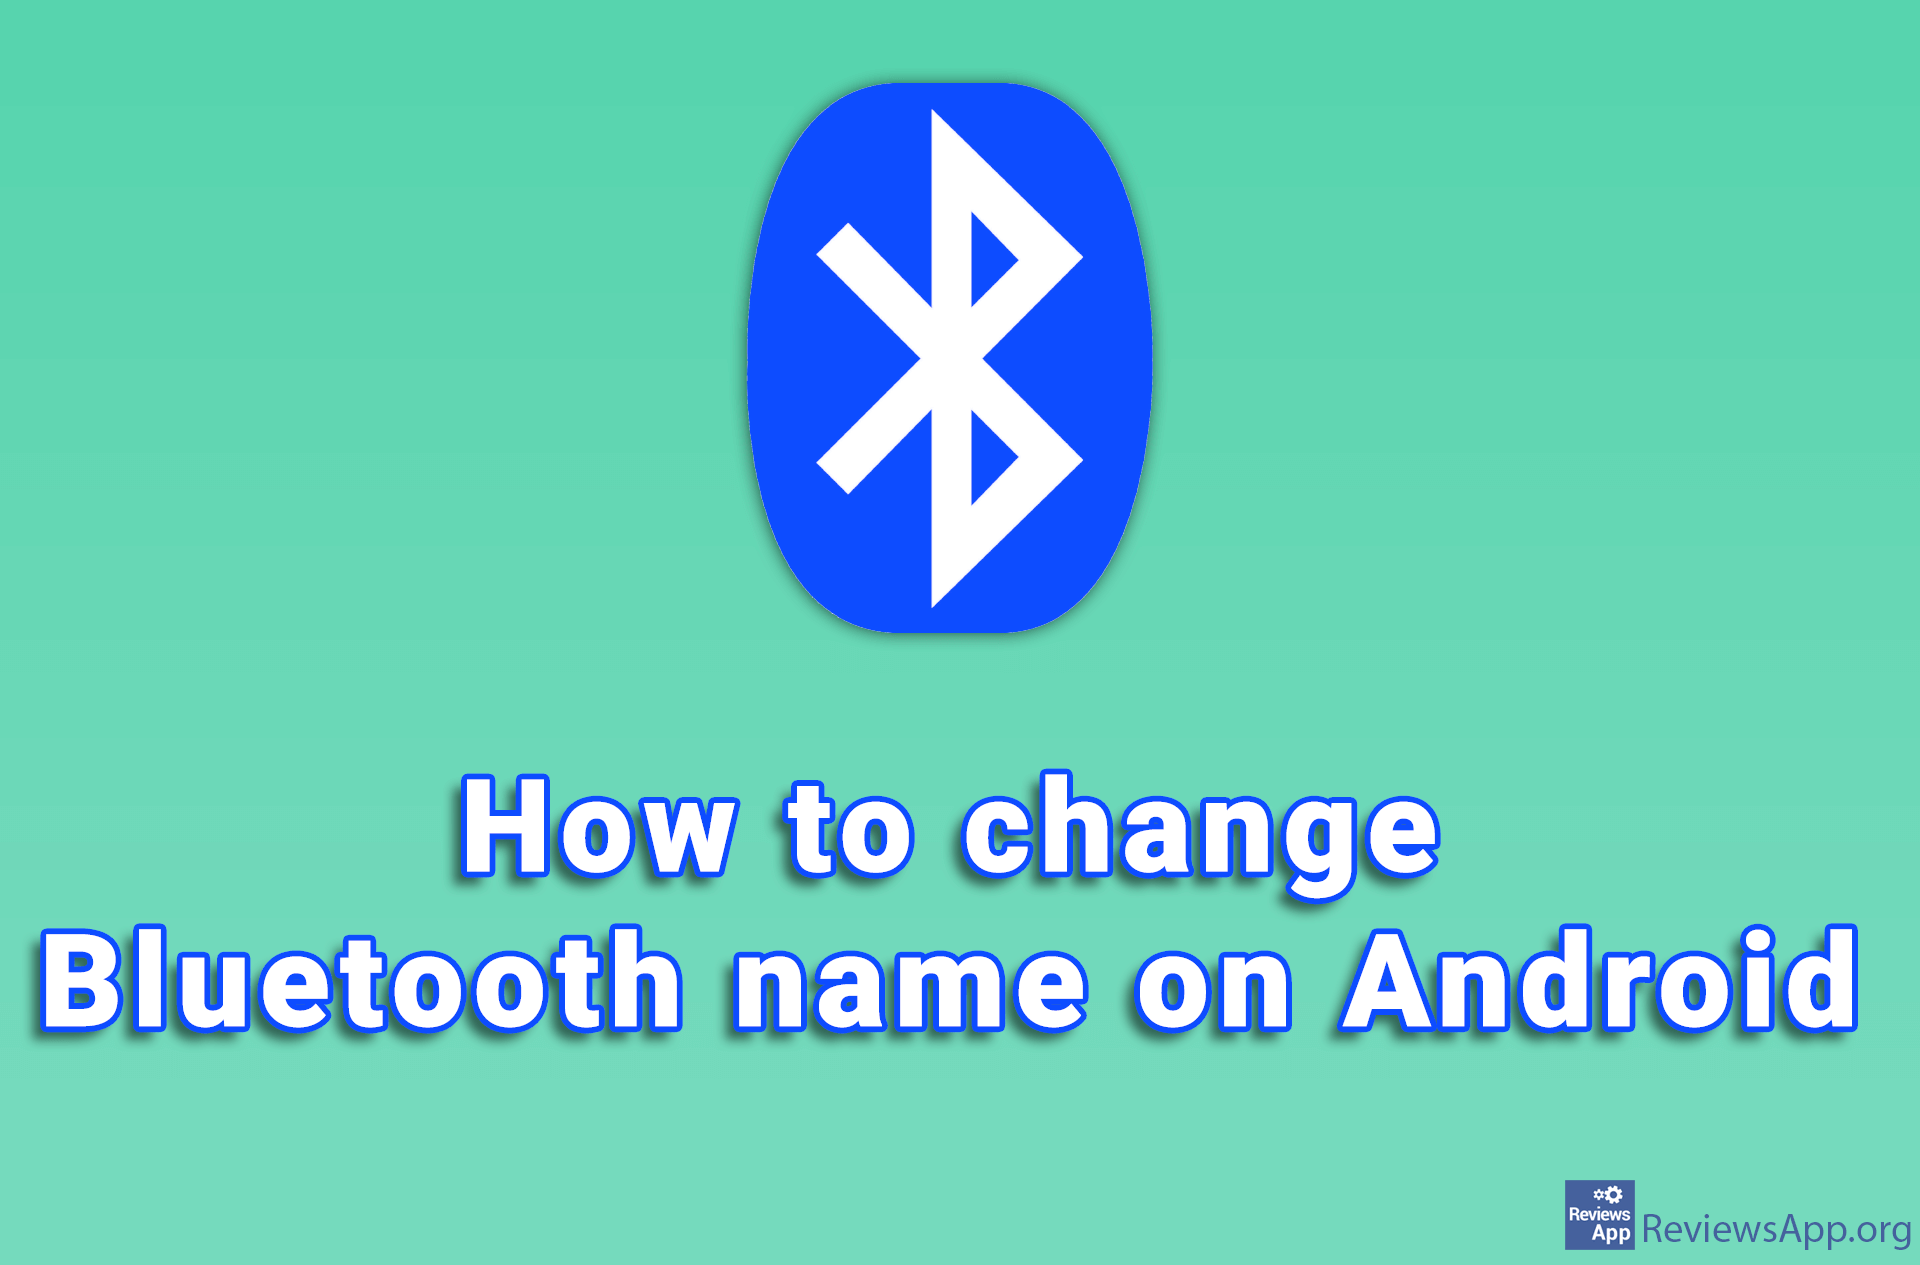 How to change Bluetooth name on Android